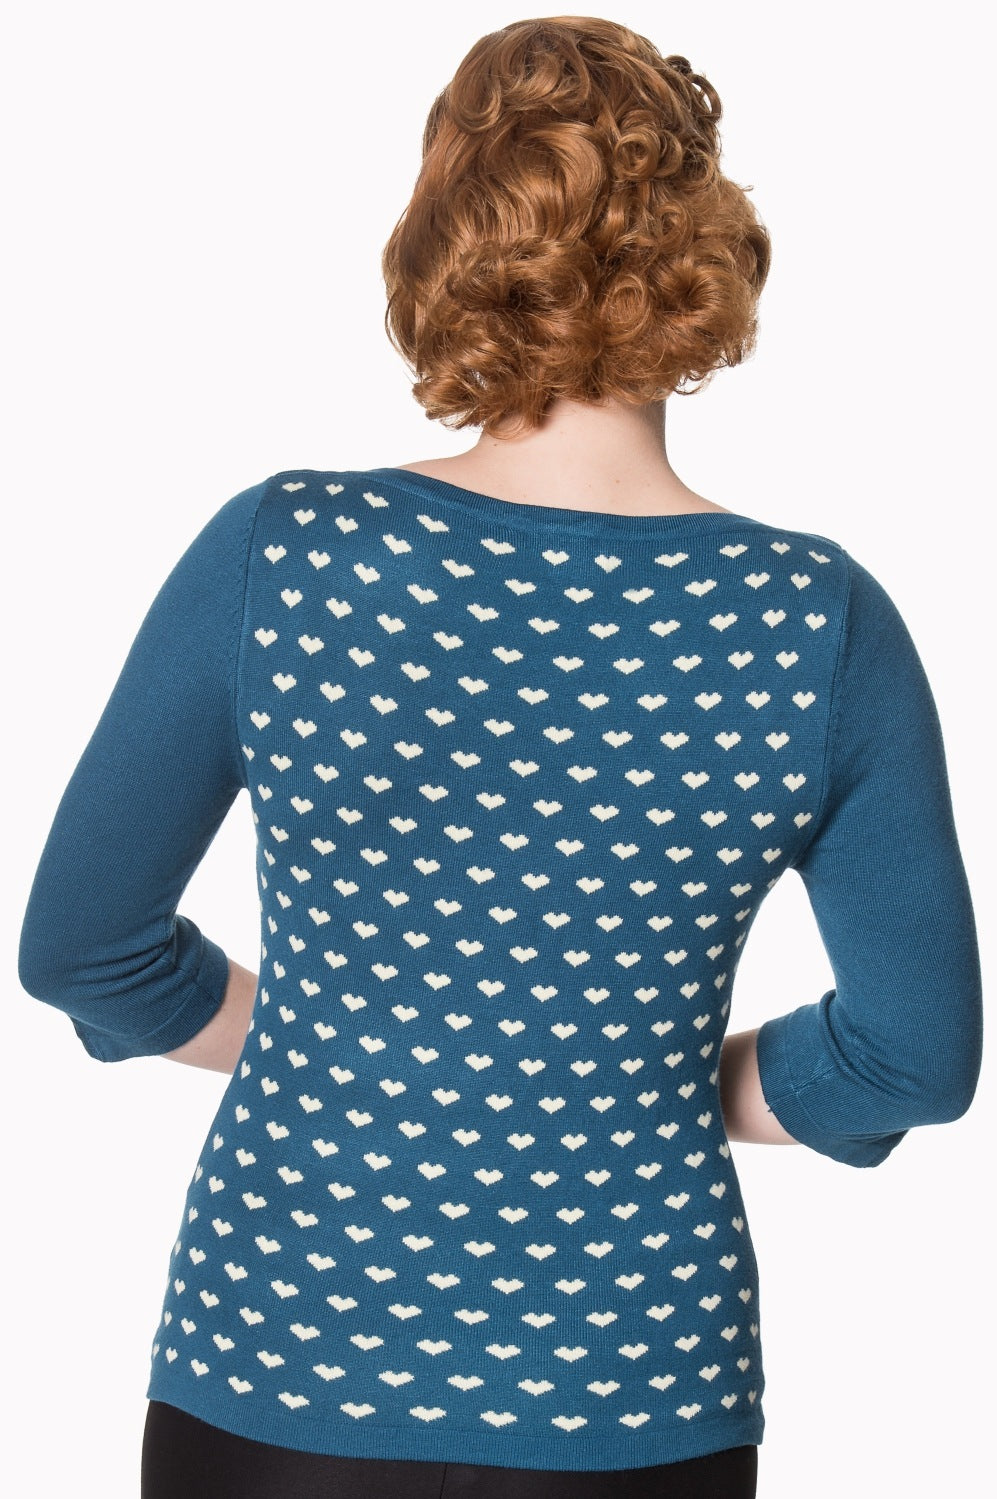 Rules of the Heart Jumper teal